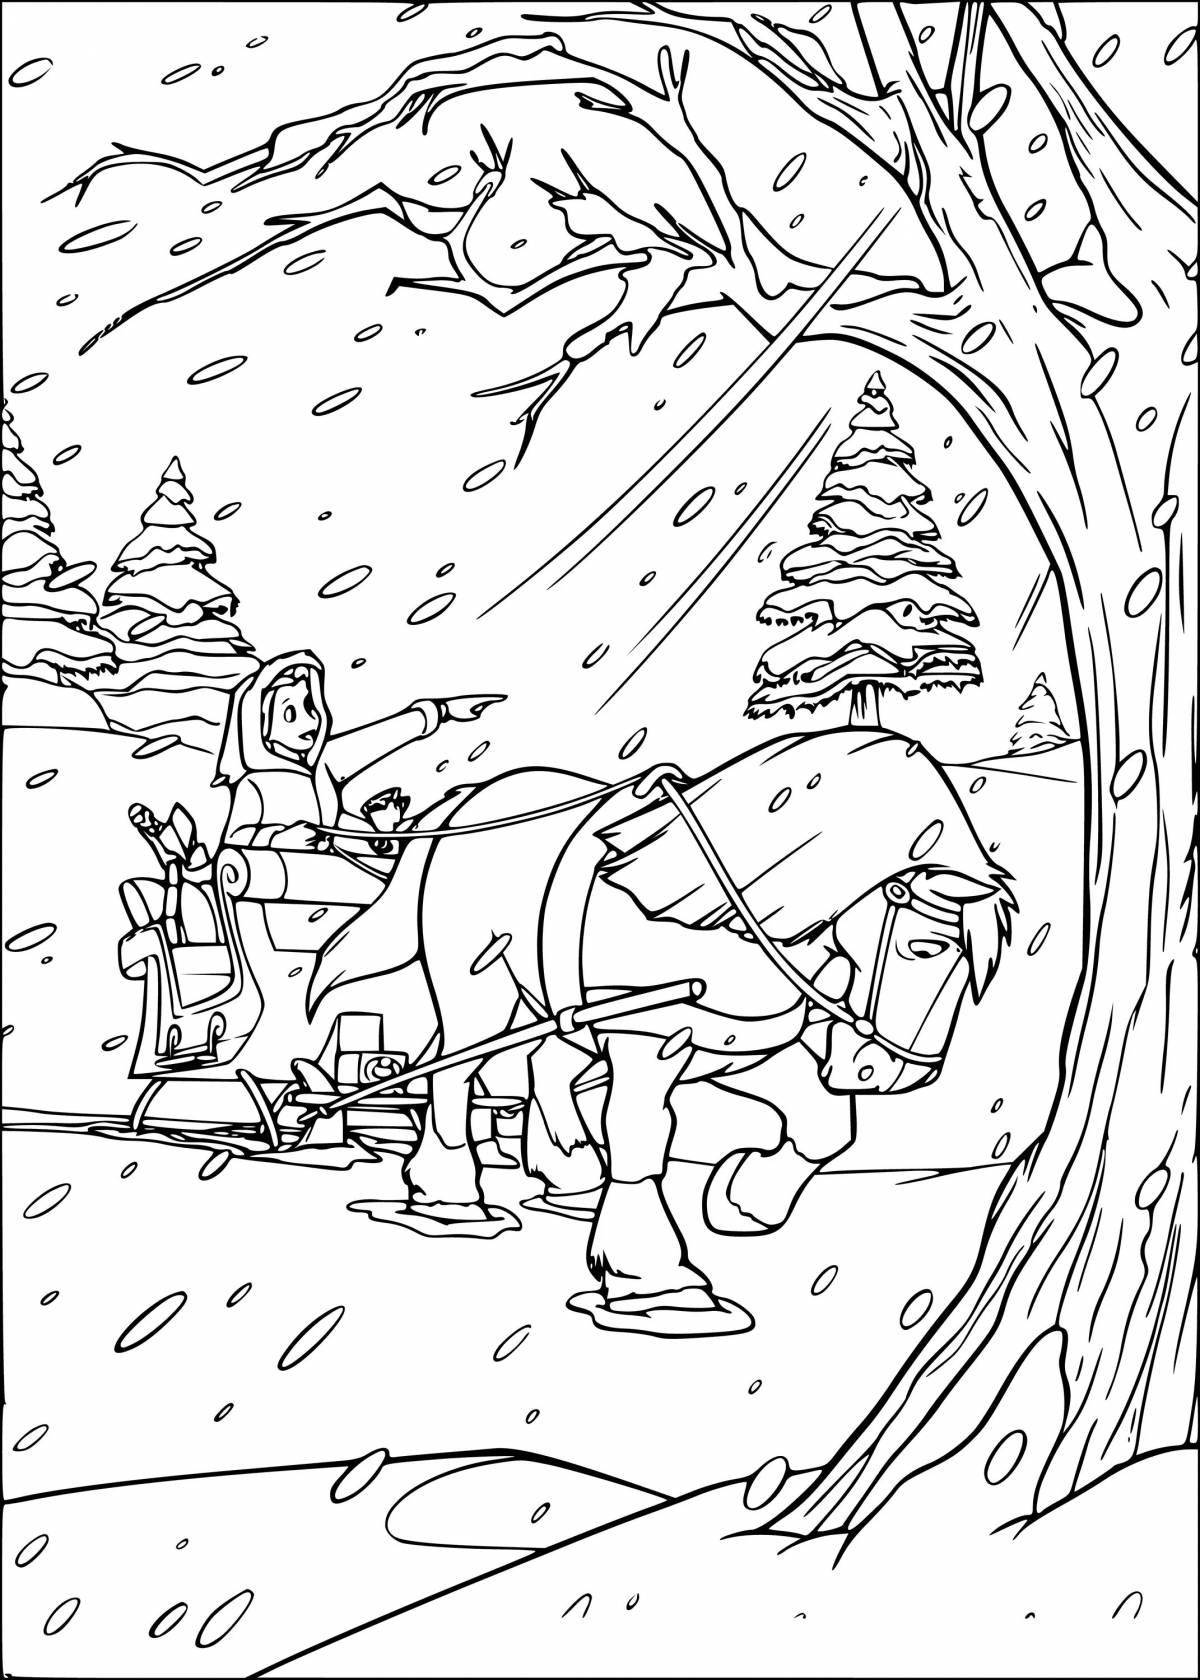 Glorious winter horses coloring page